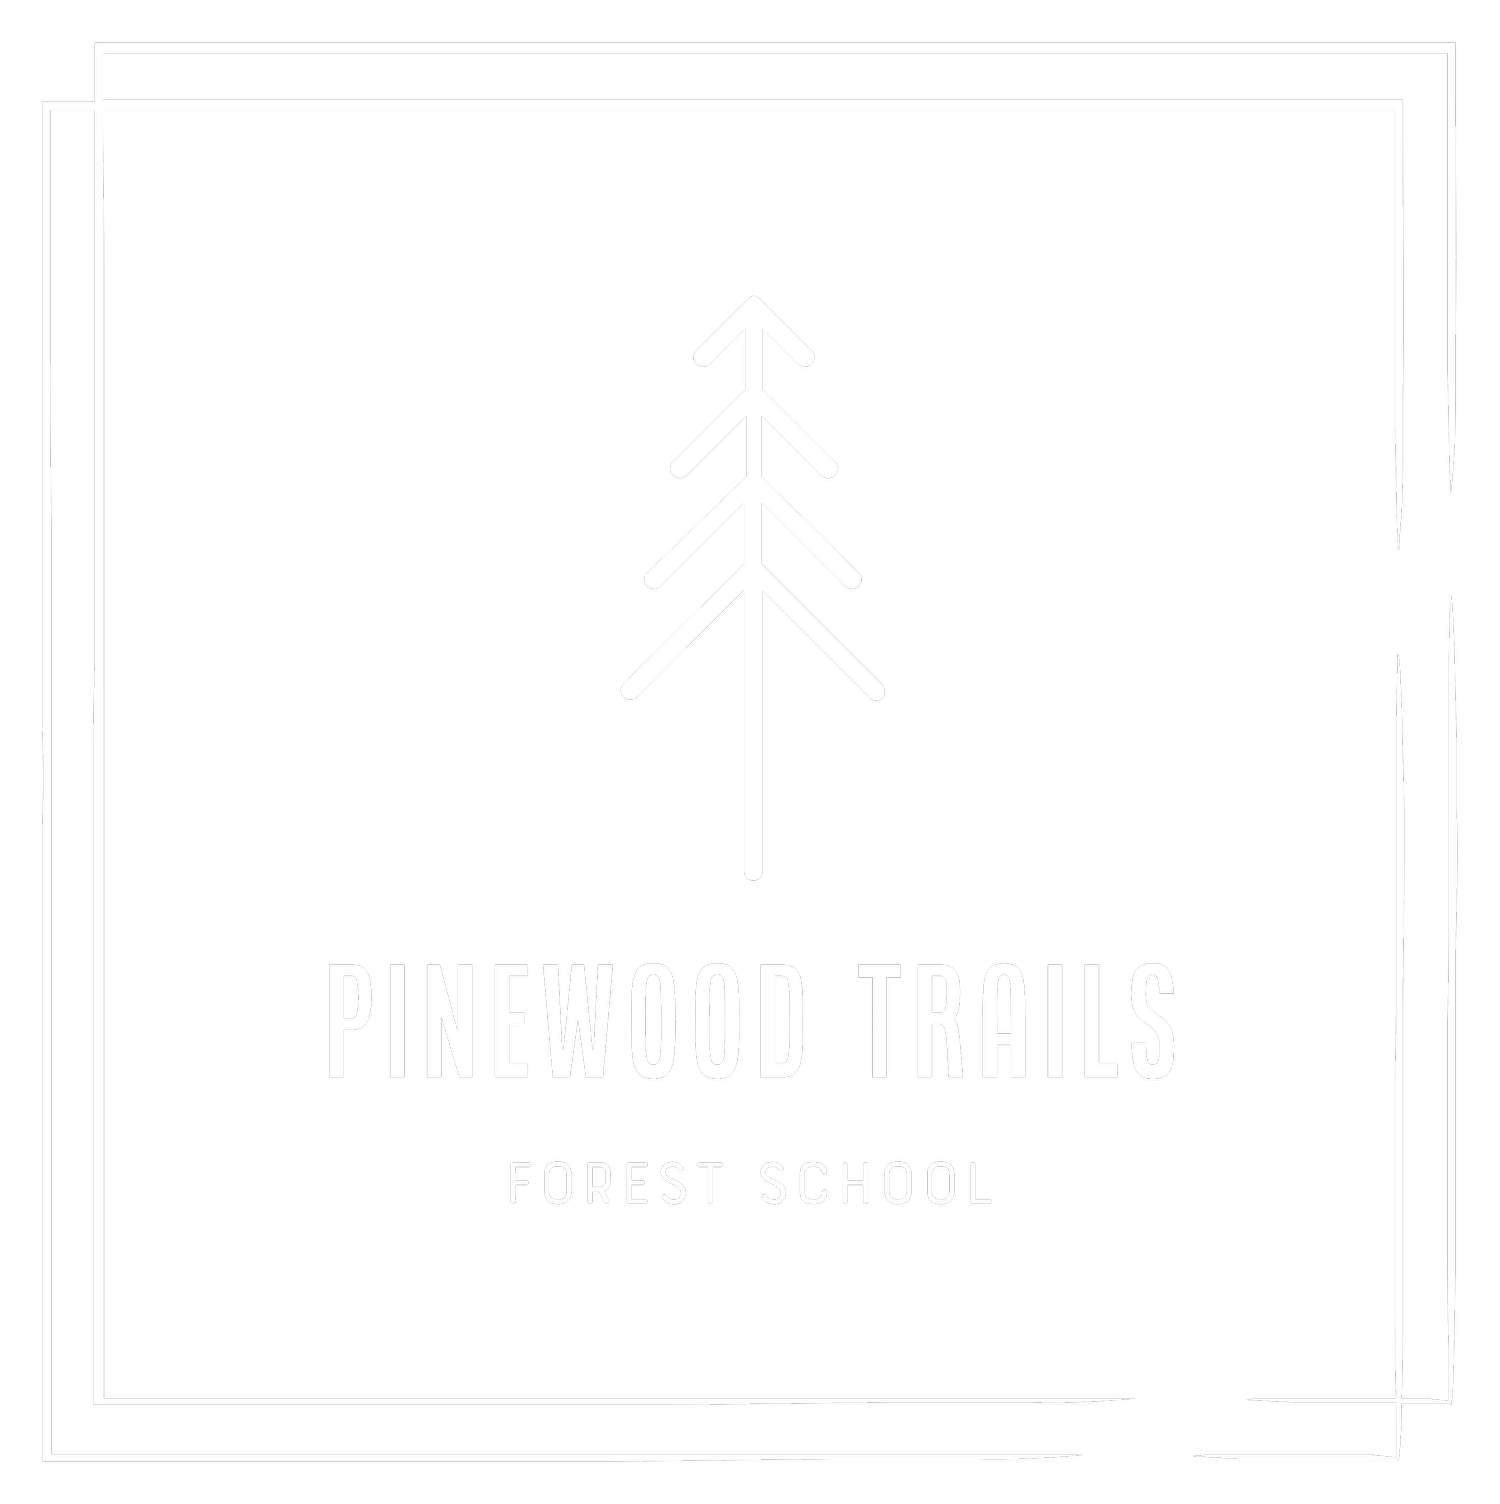 Pinewood Trails Forest School